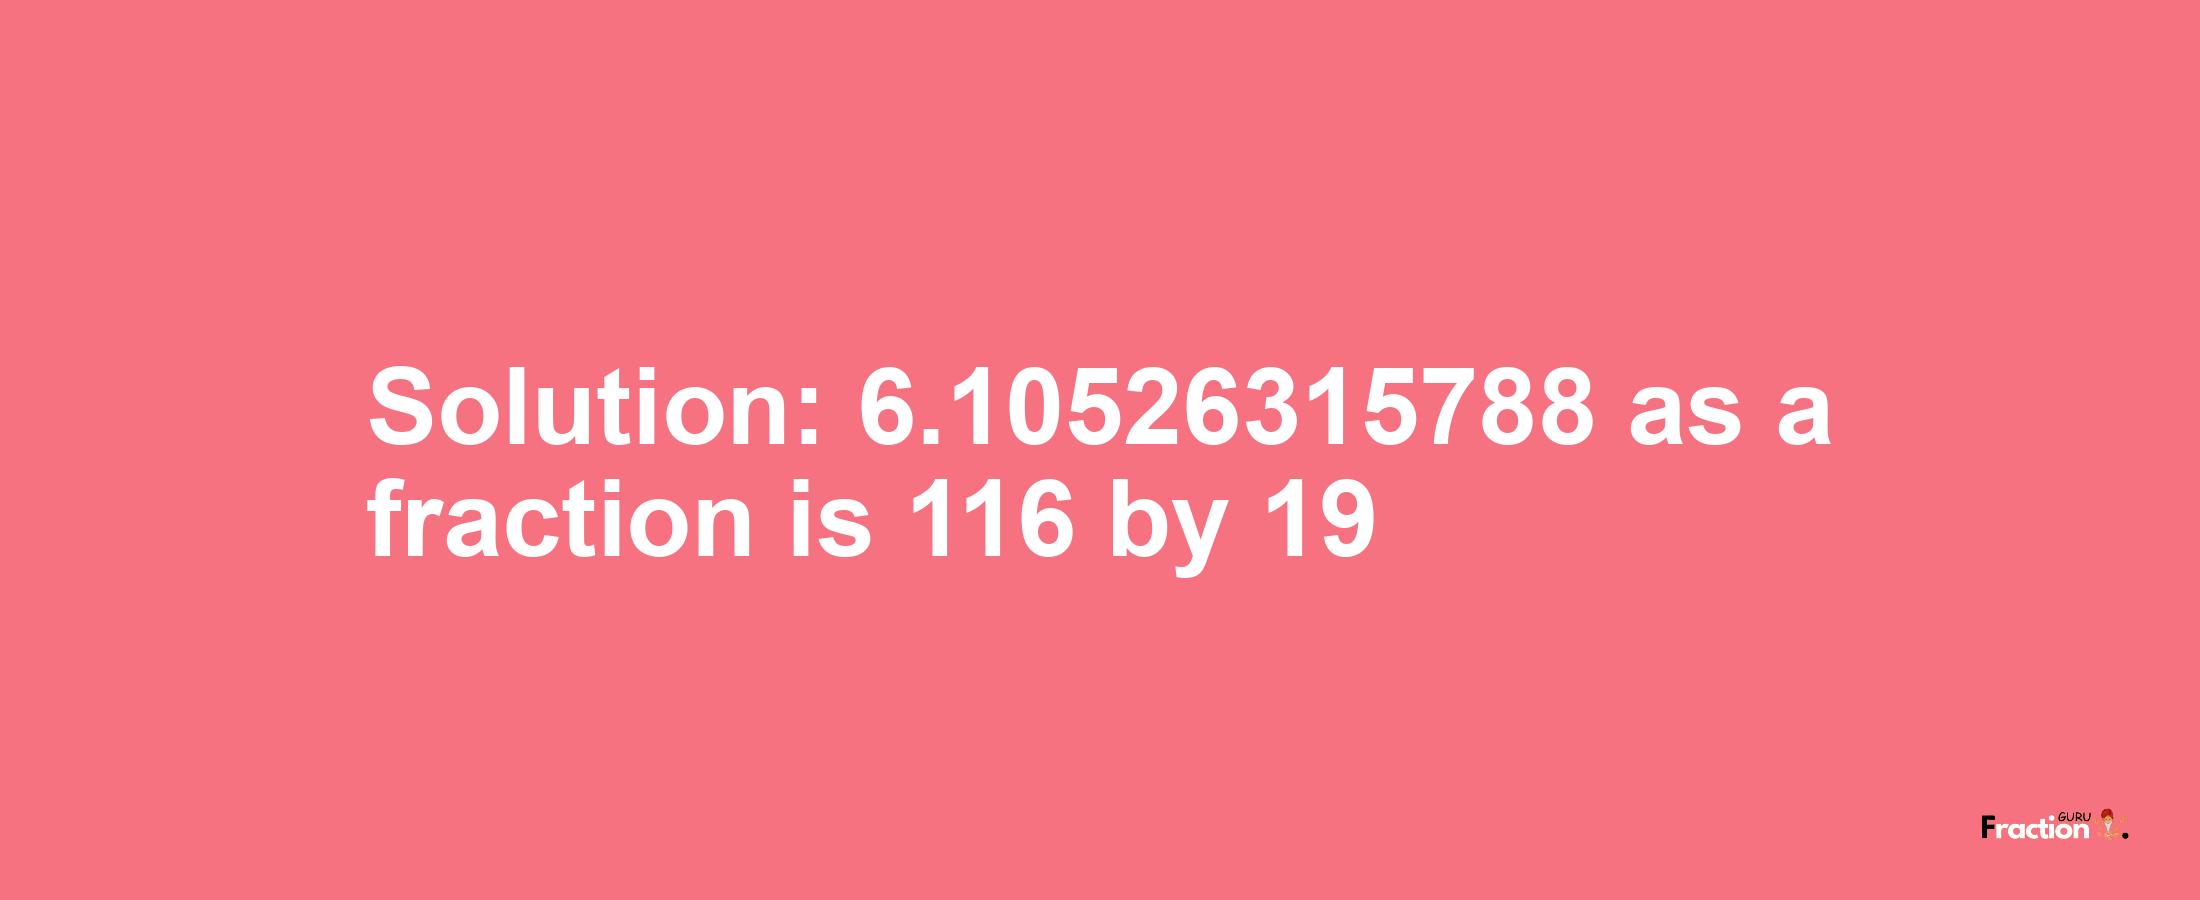 Solution:6.10526315788 as a fraction is 116/19